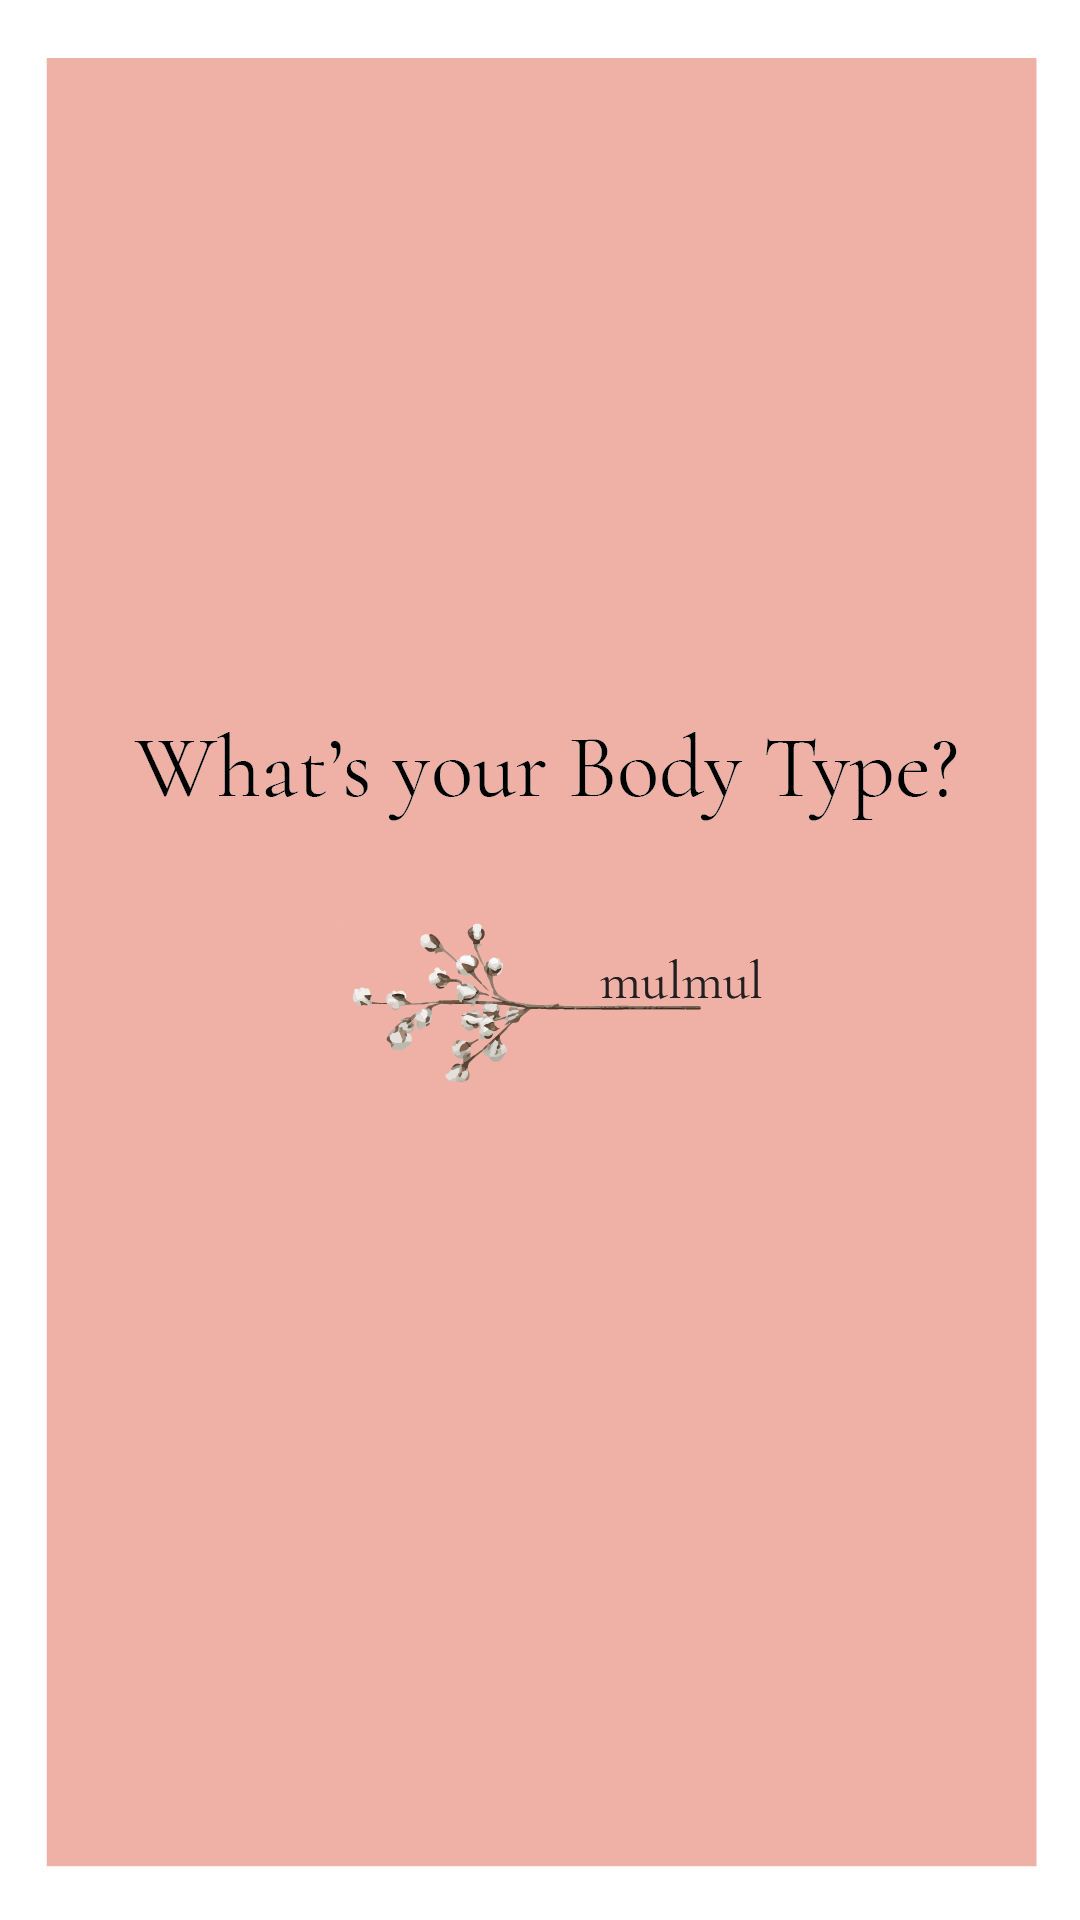 What's your Body Type?